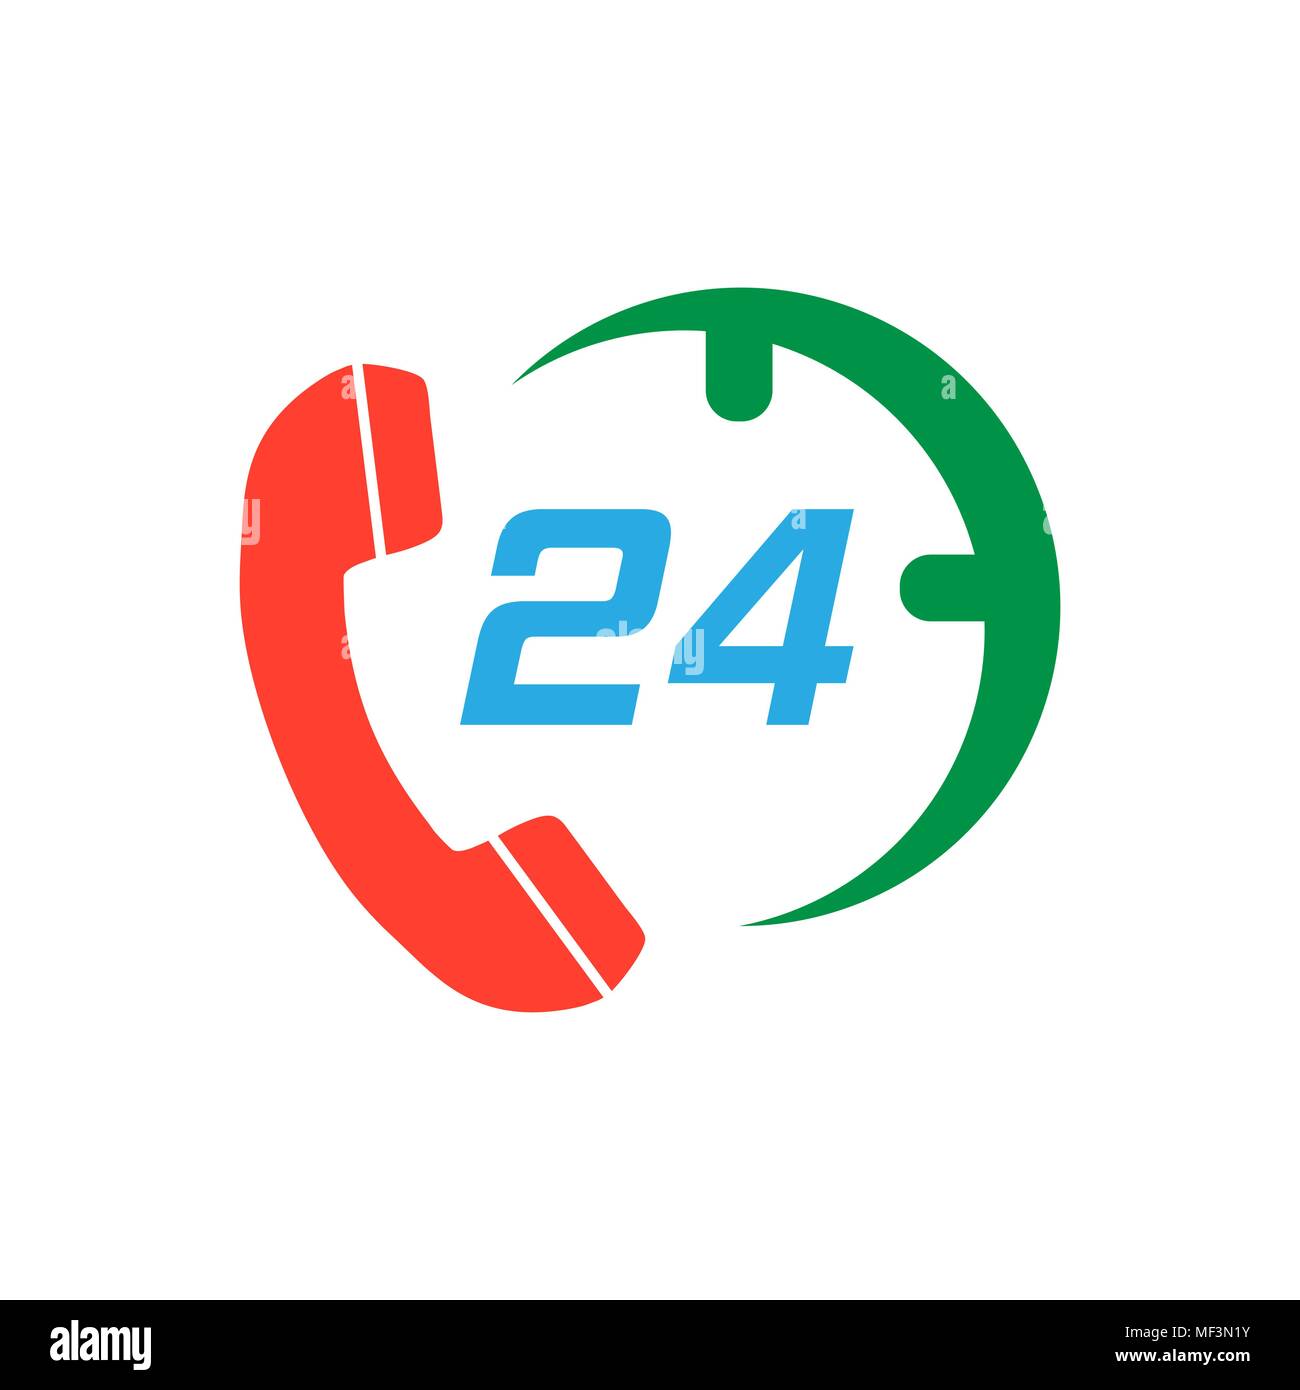 Technical support 24/7 vector icon in flat style. Phone clock help illustration on white isolated background. Computer service support concept. Stock Vector